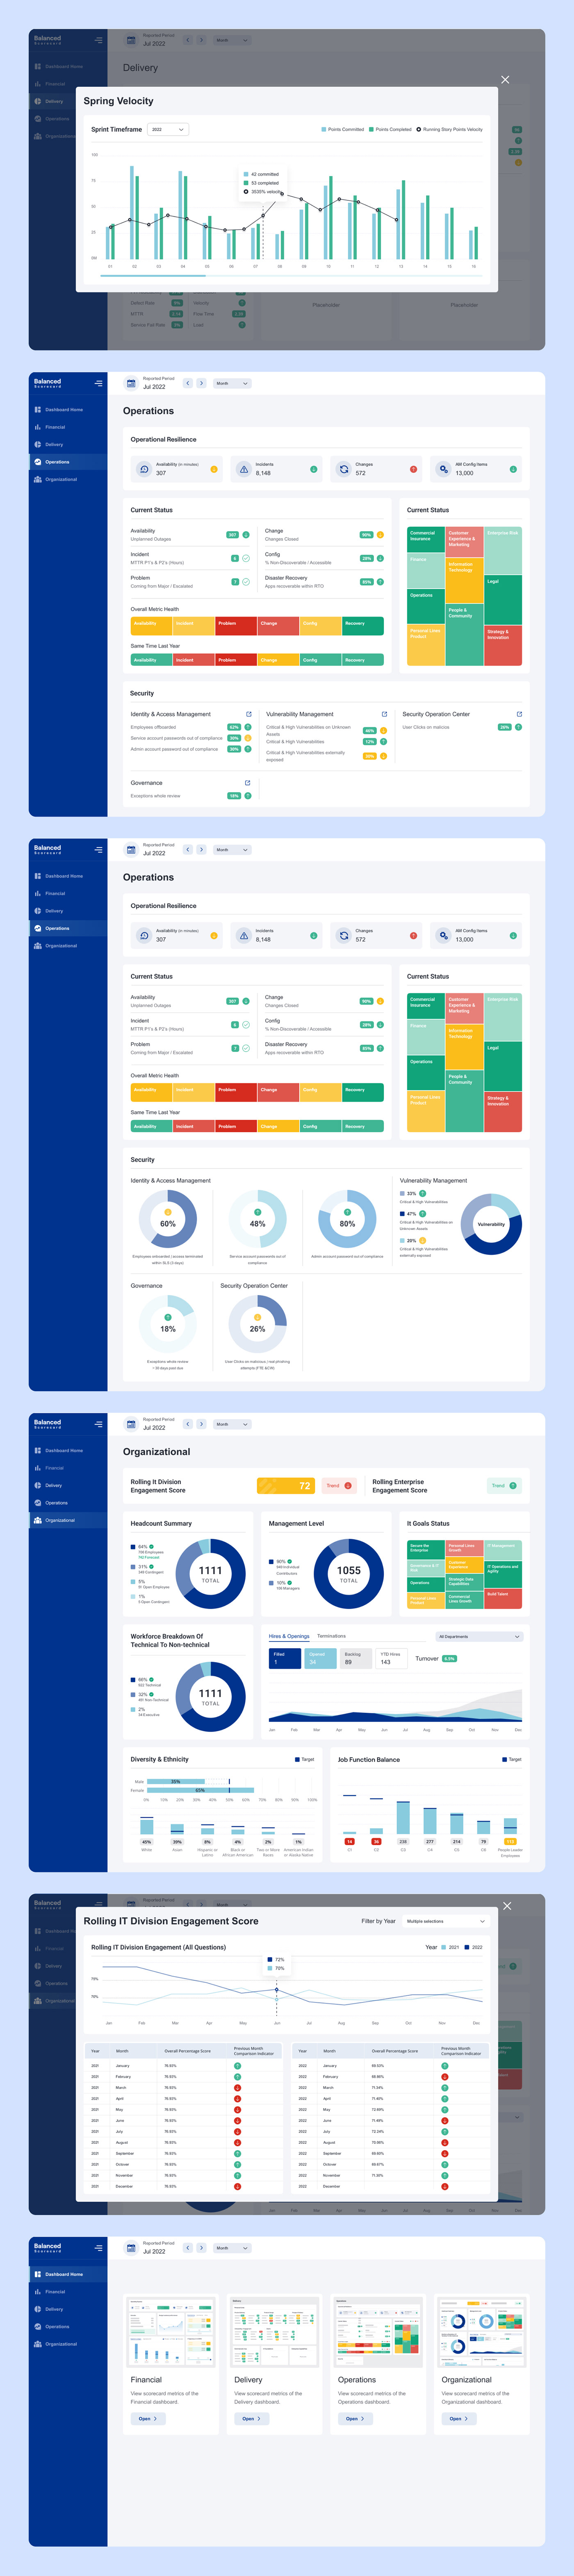 dashboard Project Management reporting management report business analytics user interface time management